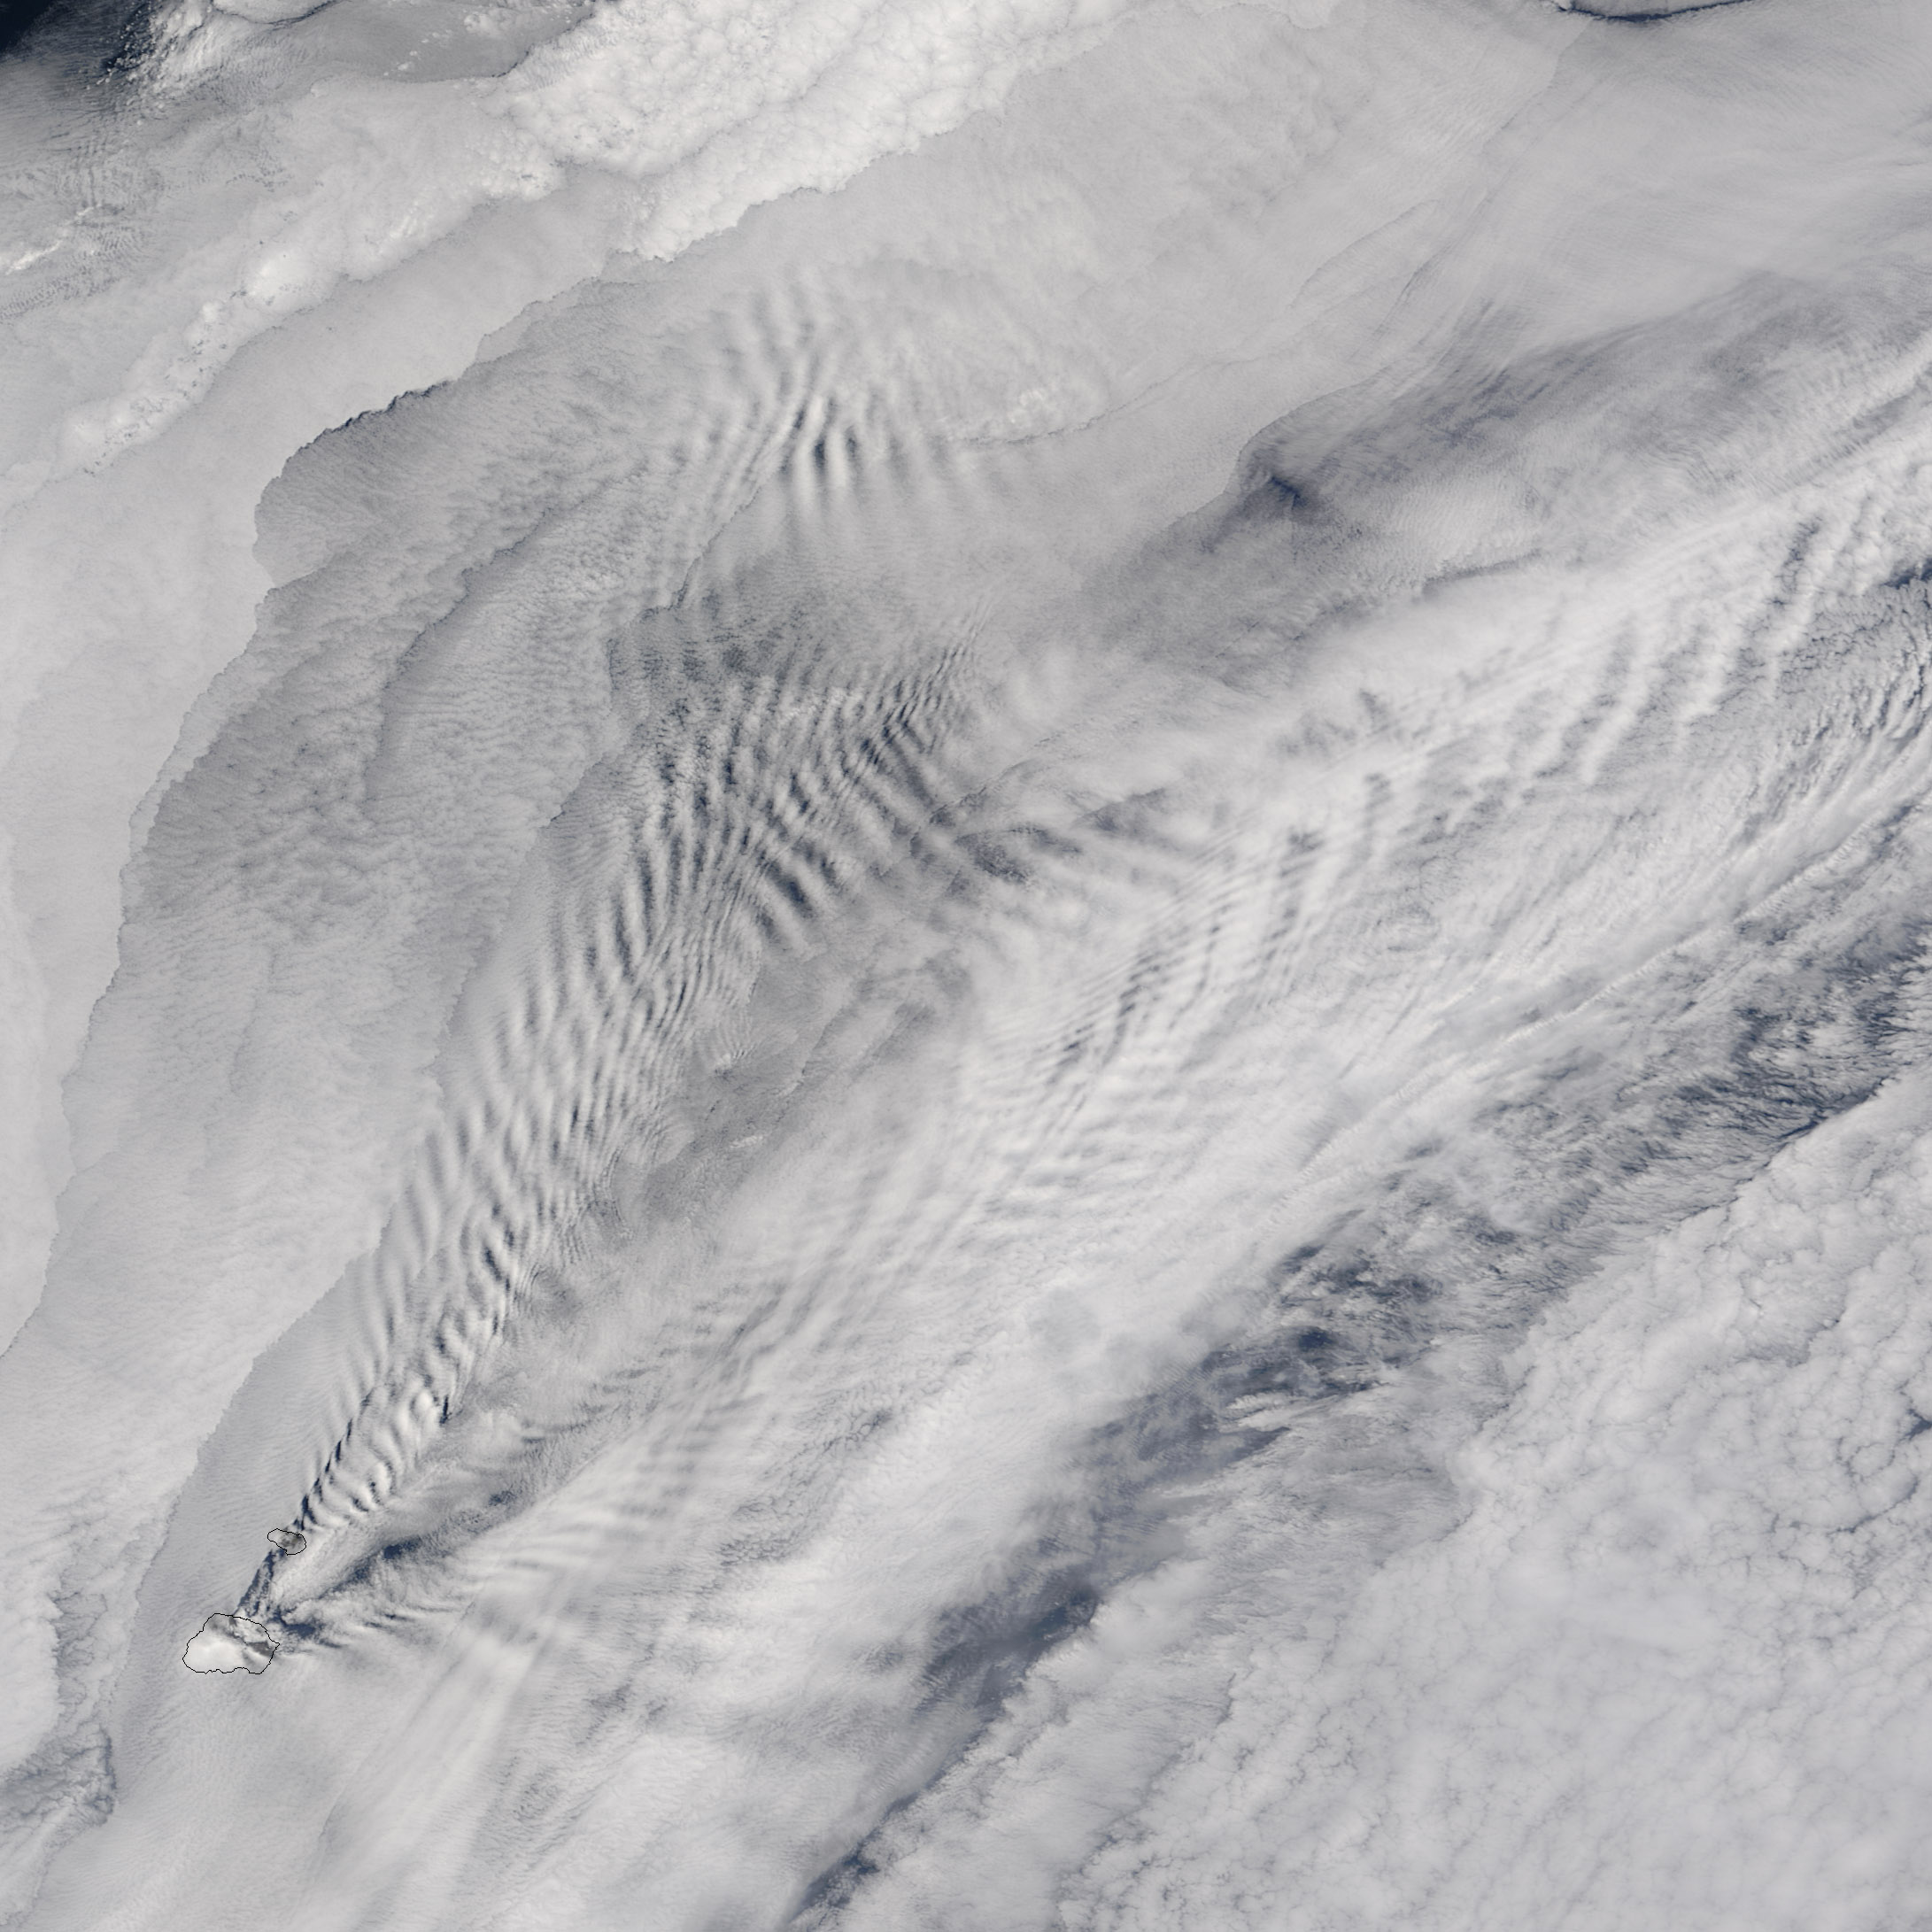 Wave Clouds Behind the Prince Edward Islands - related image preview